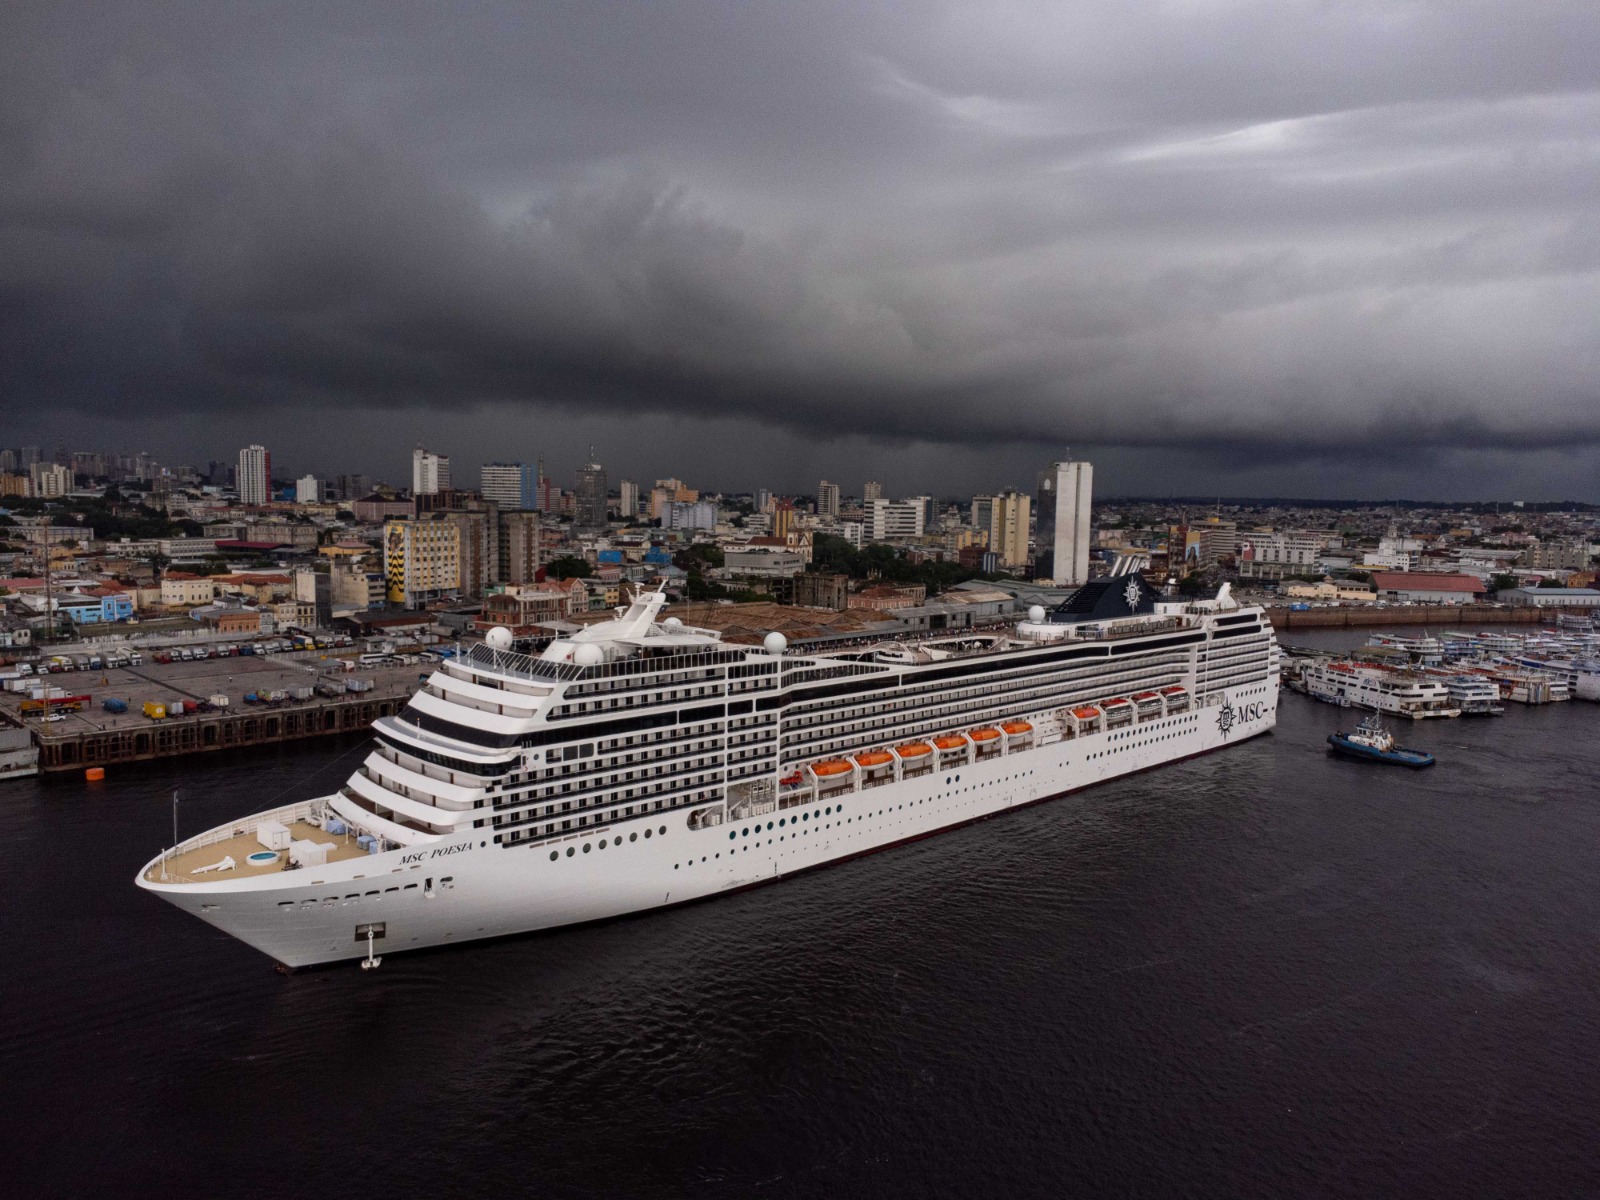 Cruise arrives in Manaus with 3 thousand tourists